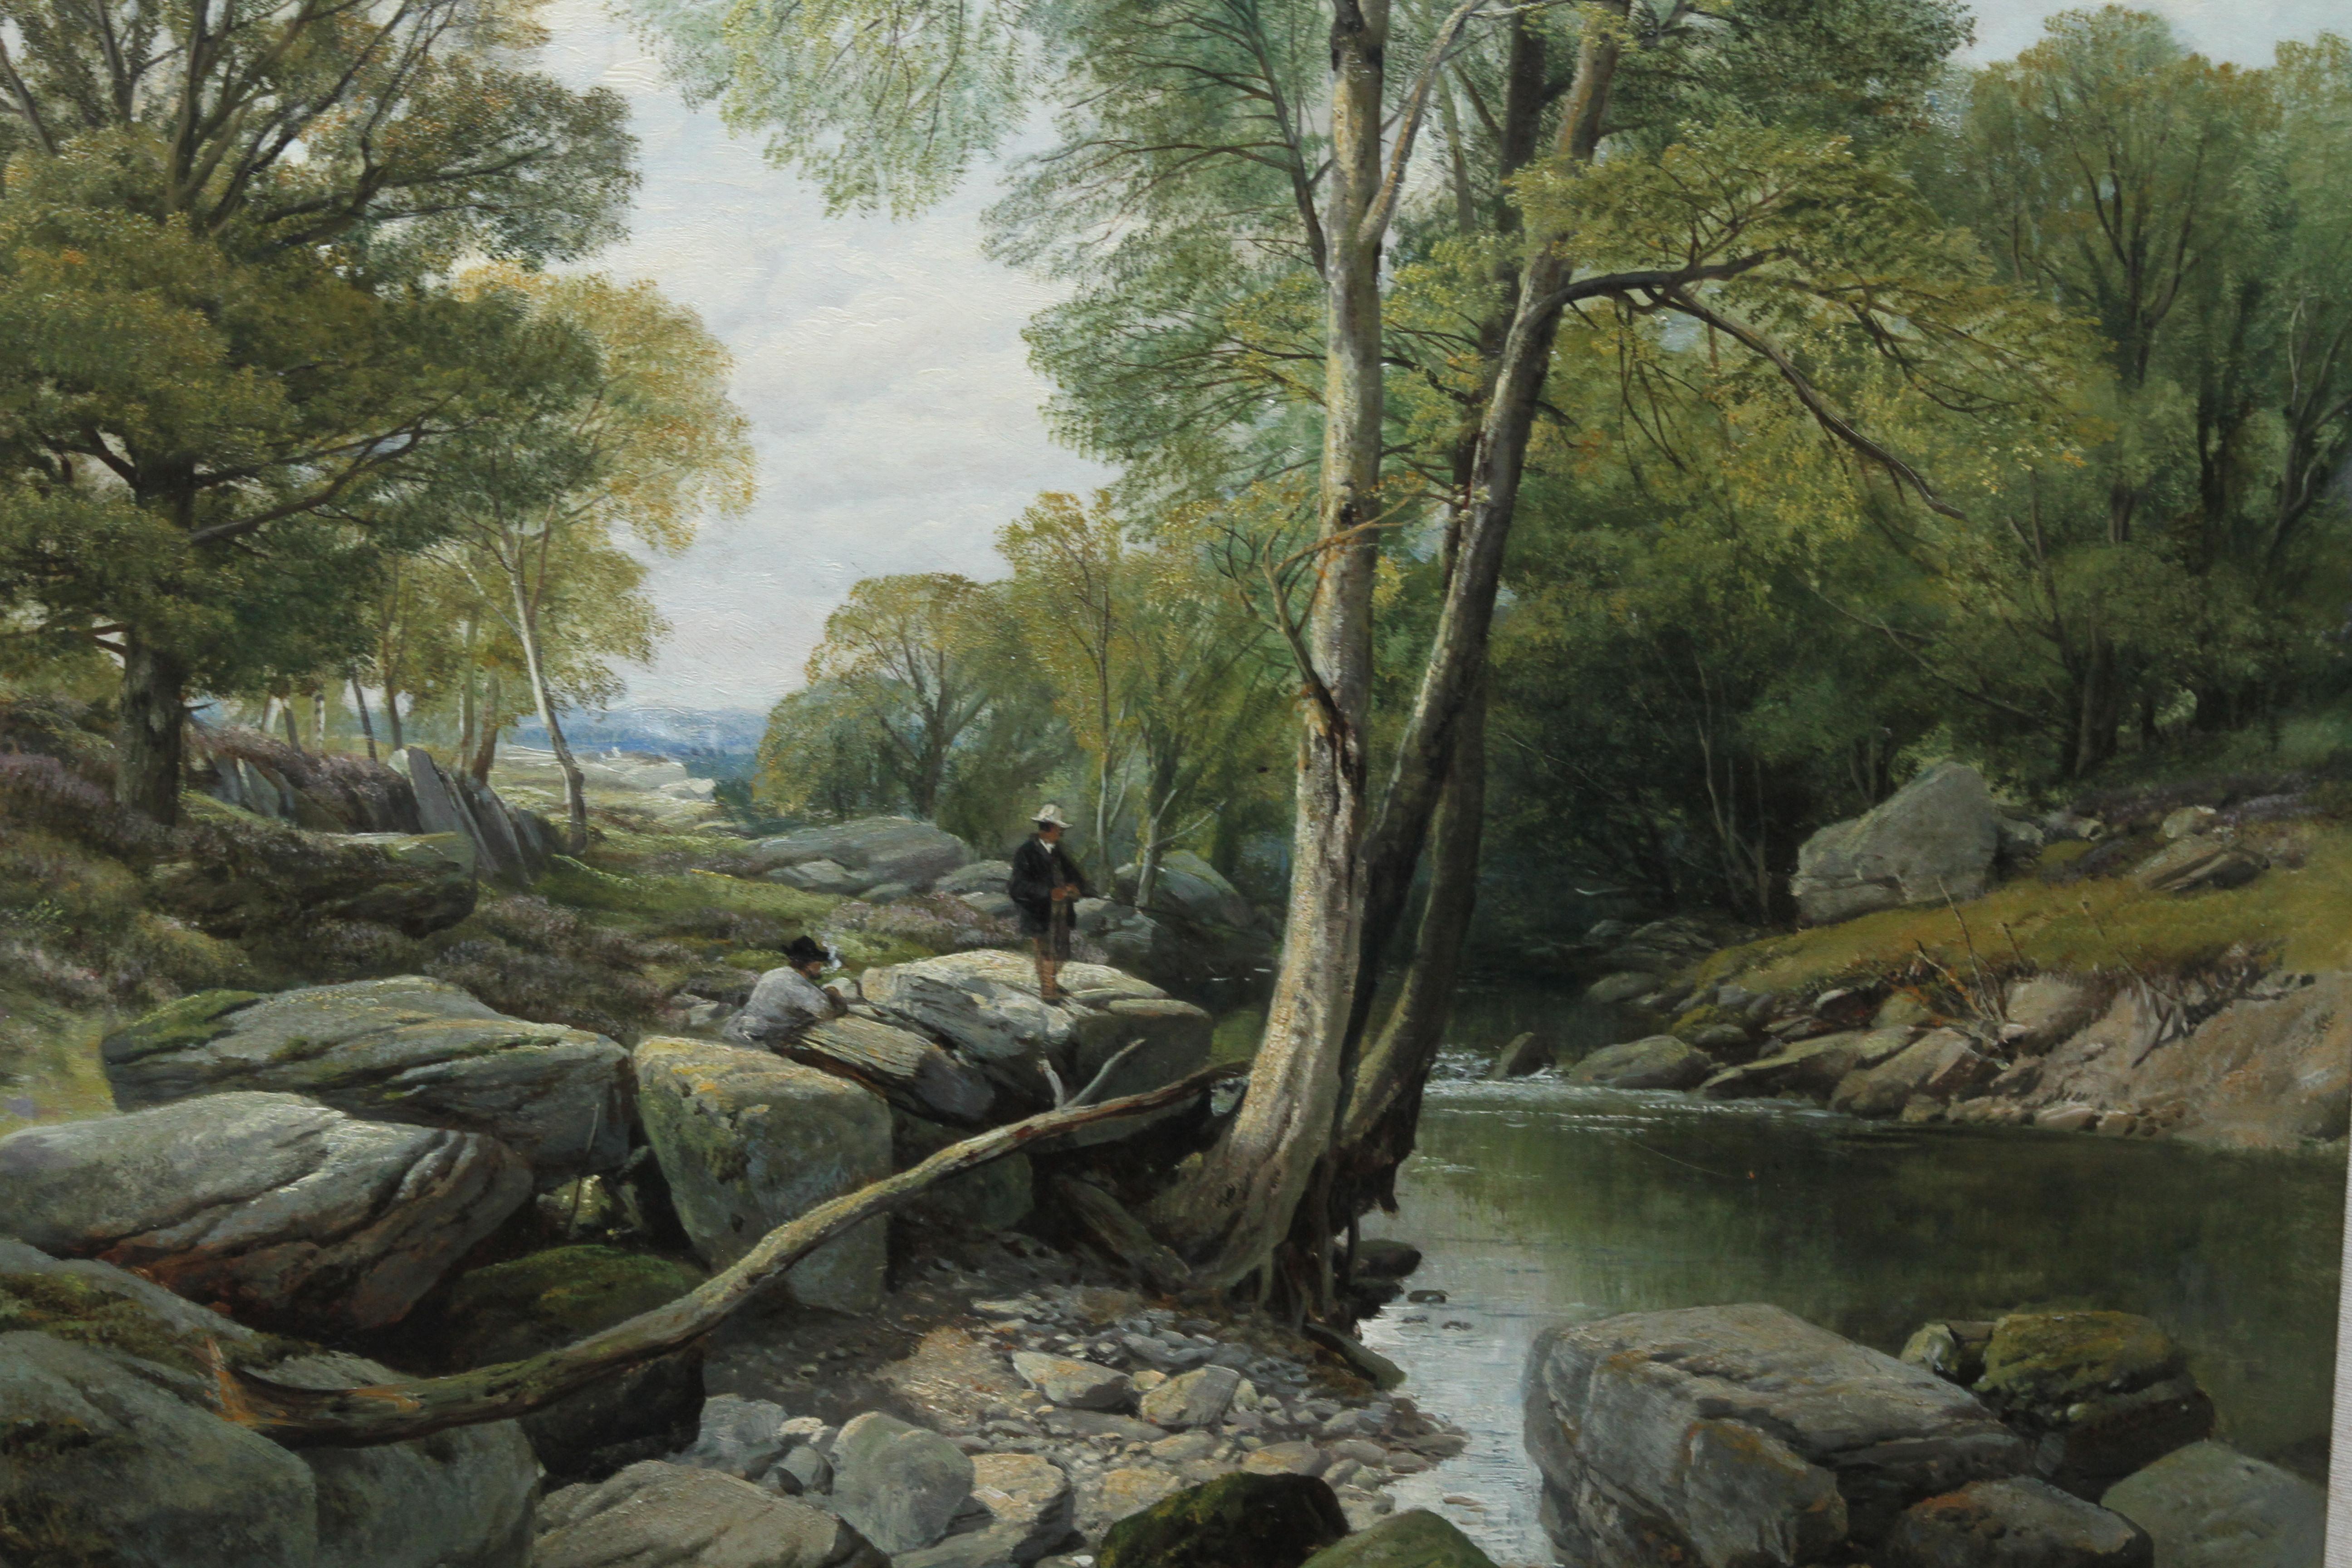 This charming Victorian landscape is by much exhibited British artist Frederick William Hulme. The painting is of two fishermen on large rocks by the edge of a river. They are stood under a tree with a landscape view in the background and a summer's